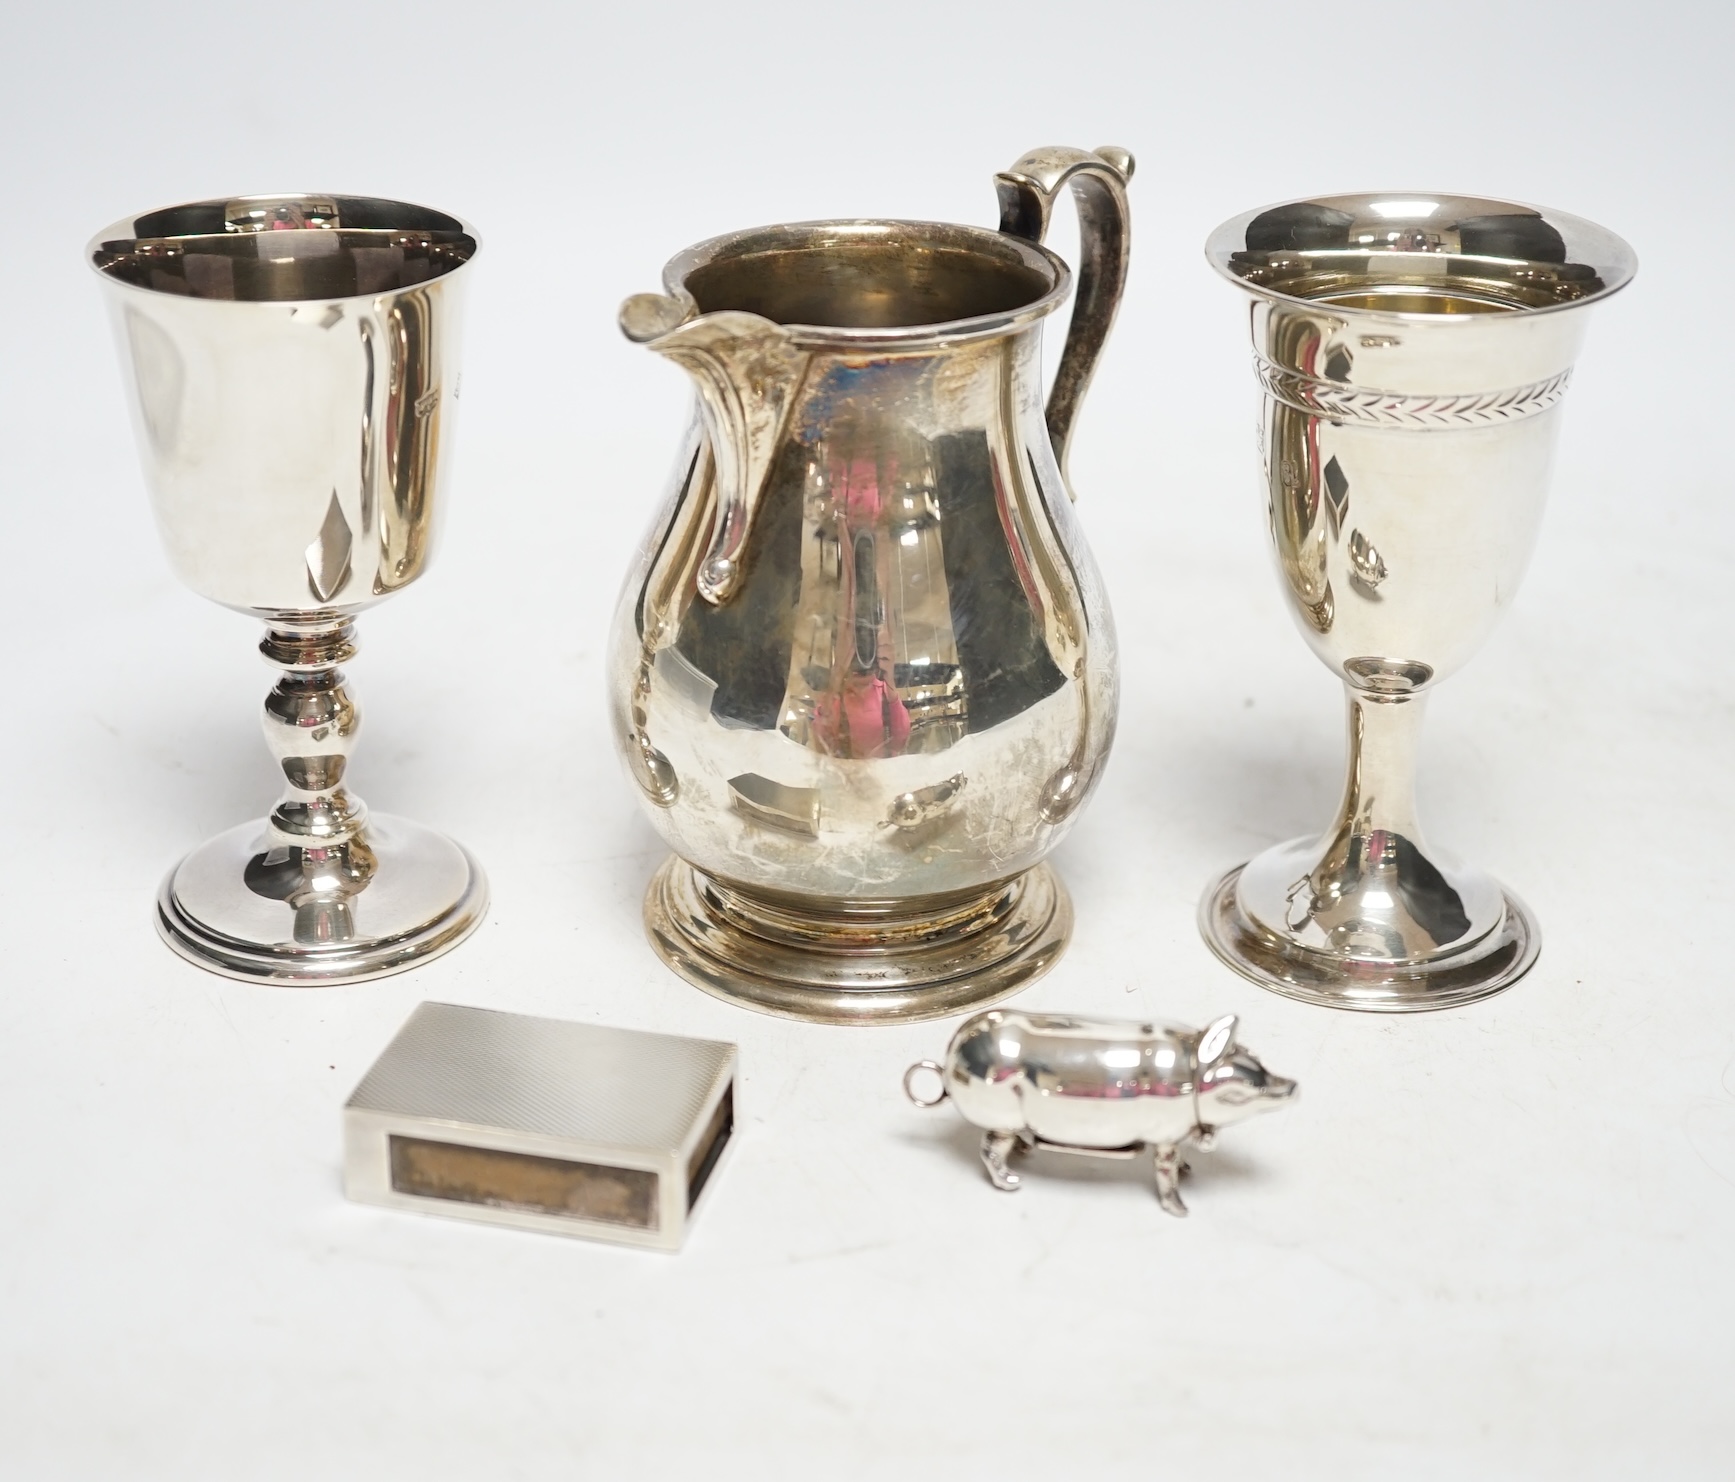 Sundry silver including a modern pig vesta case, two goblets, a match box sleeve and modern cream jug. Fair condition.